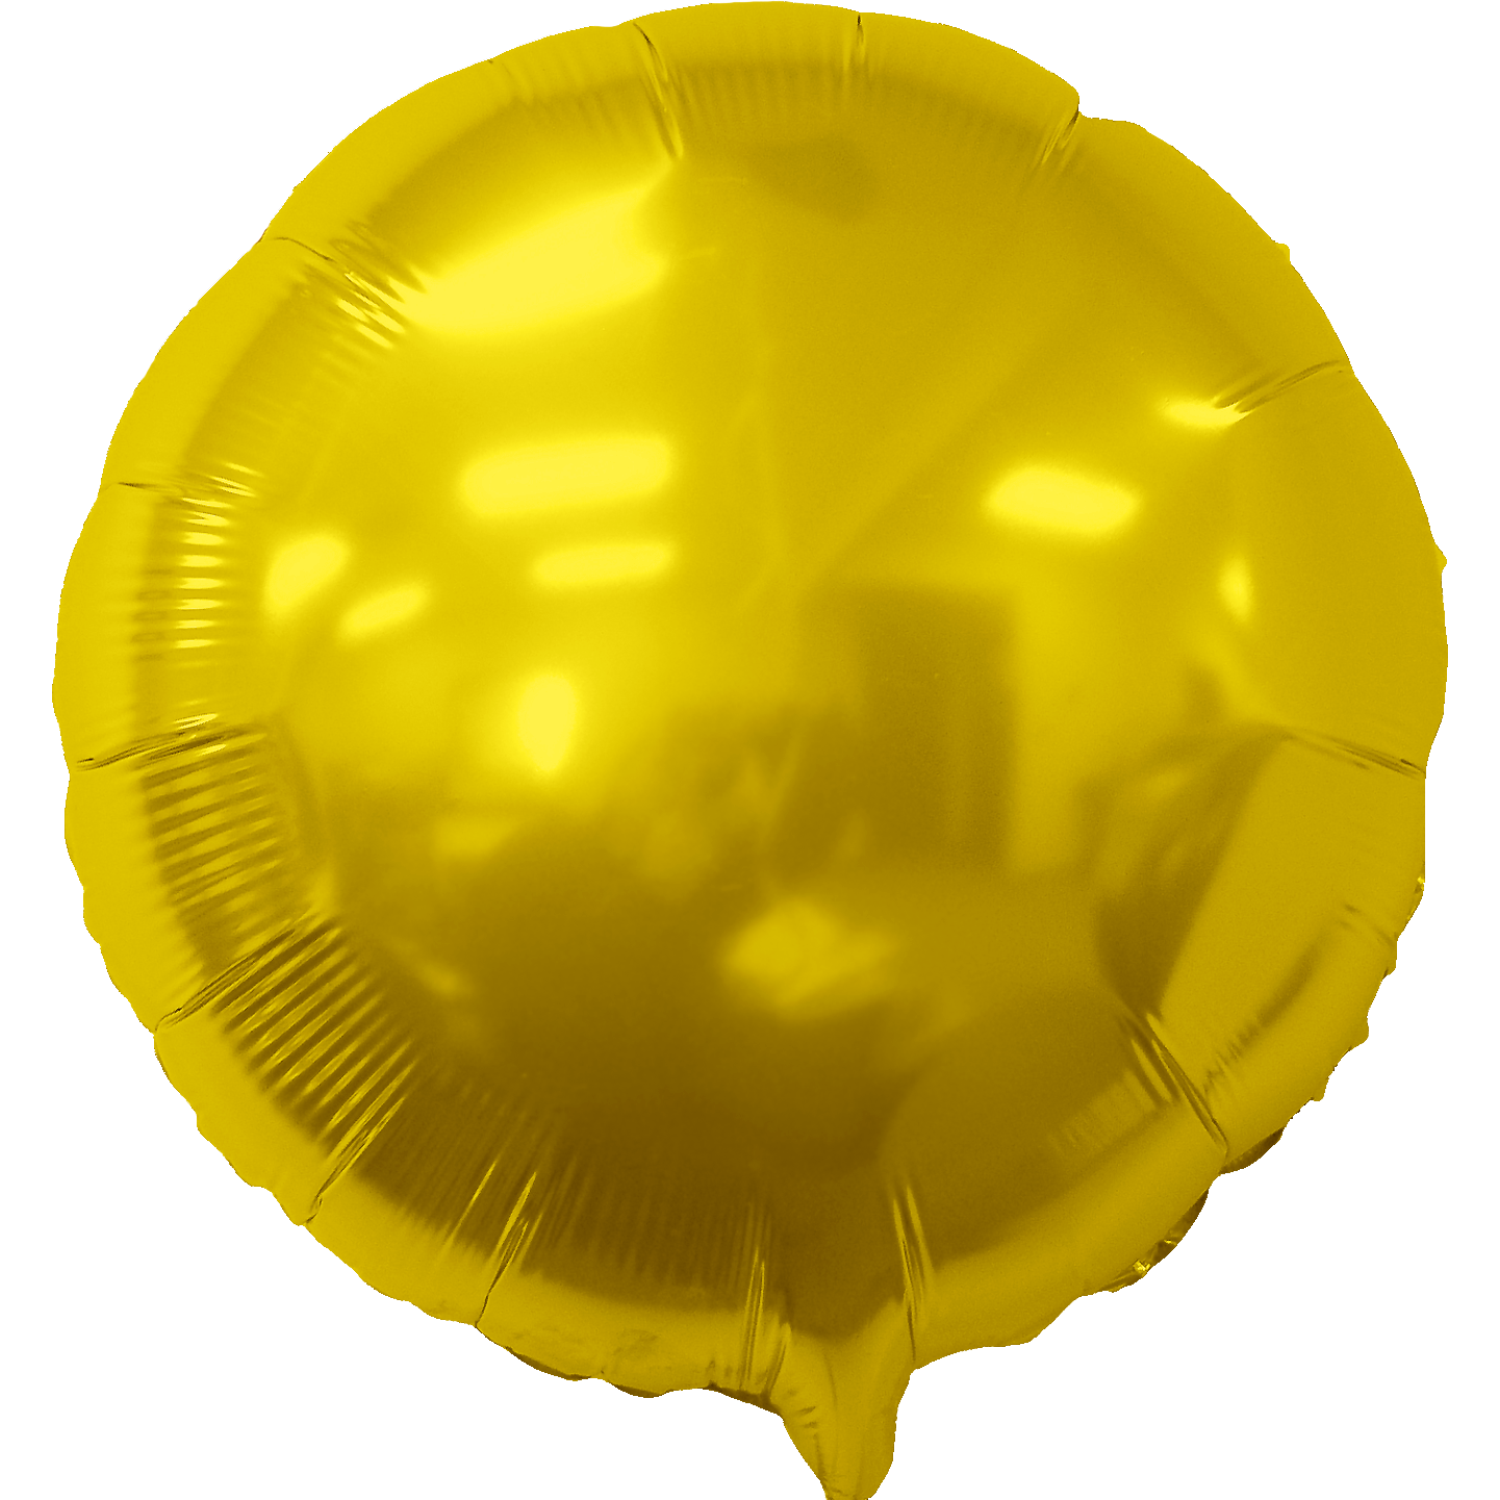 http://images.officebrain.com/migration-api-hidden-new/web/images/626/myrn-round-yellow.png